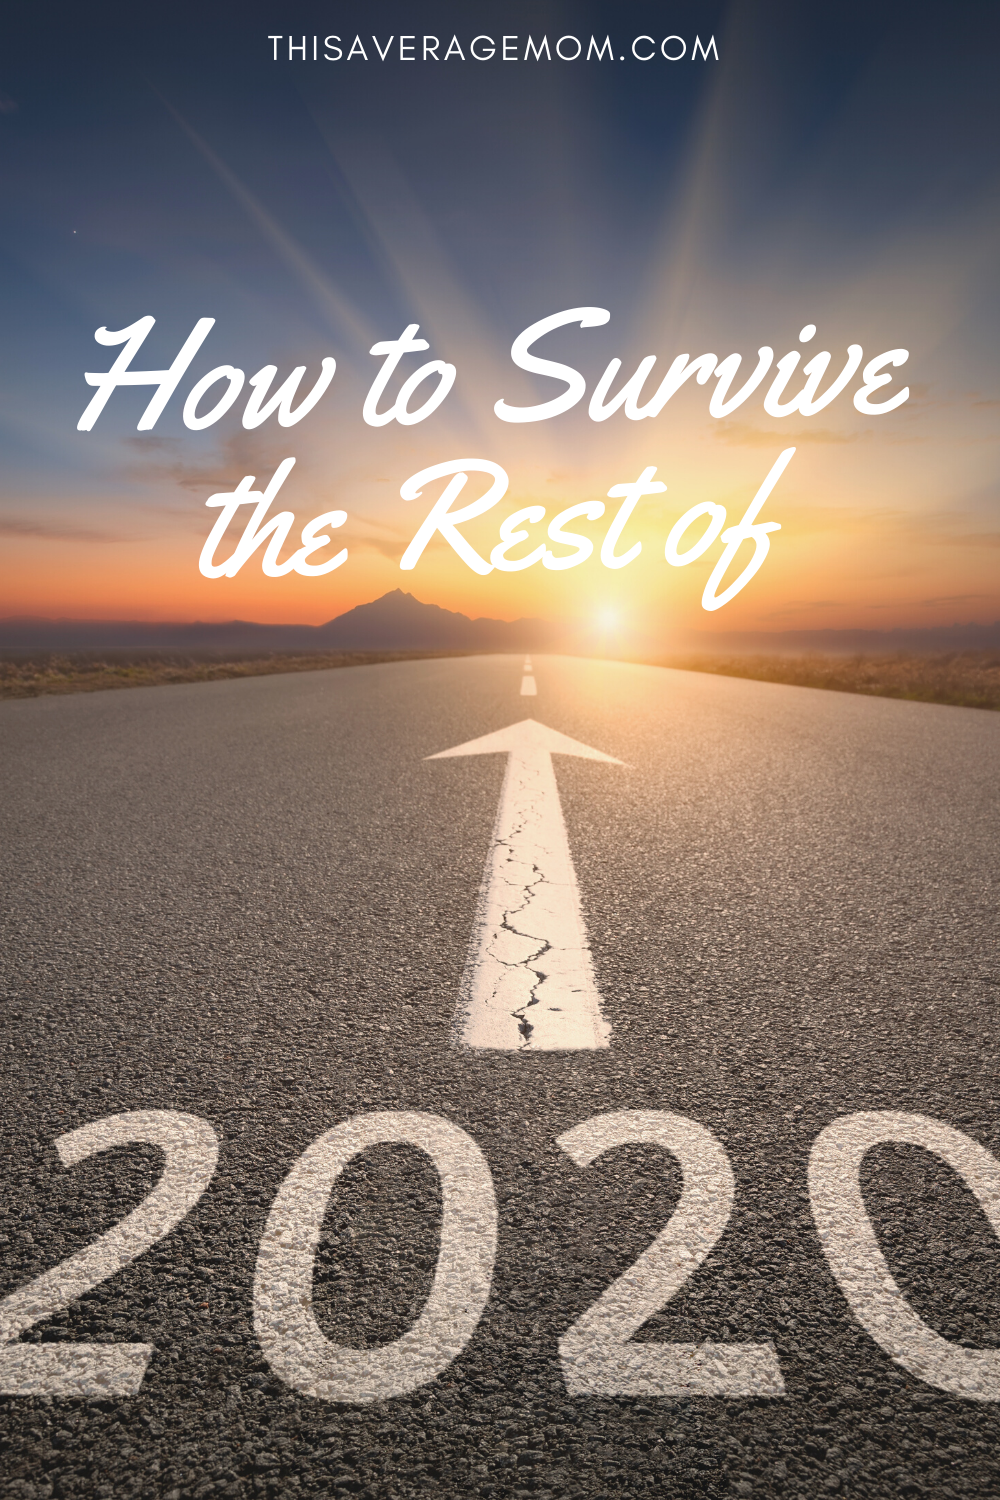 2020 has been A YEAR. But let’s be sure we don’t write off the whole entire thing, because we’re almost upon holiday season! Here’s how to survive the rest of this year and find happiness even during a time we least expect it.